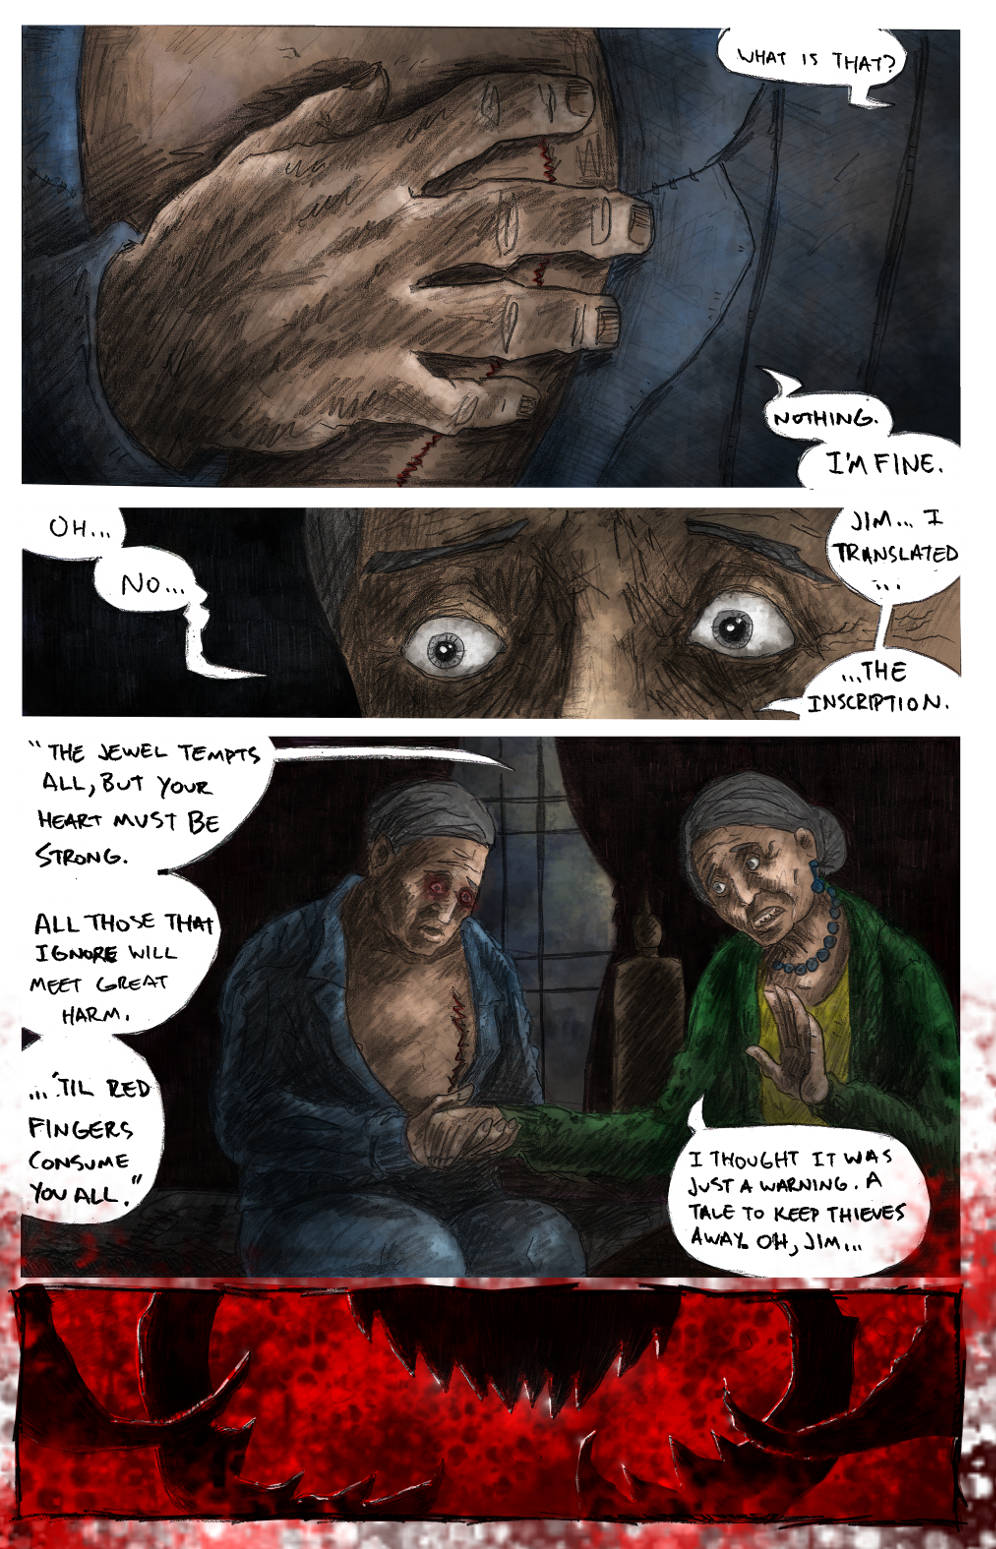 Page 36. Please enable images to read the comics :)